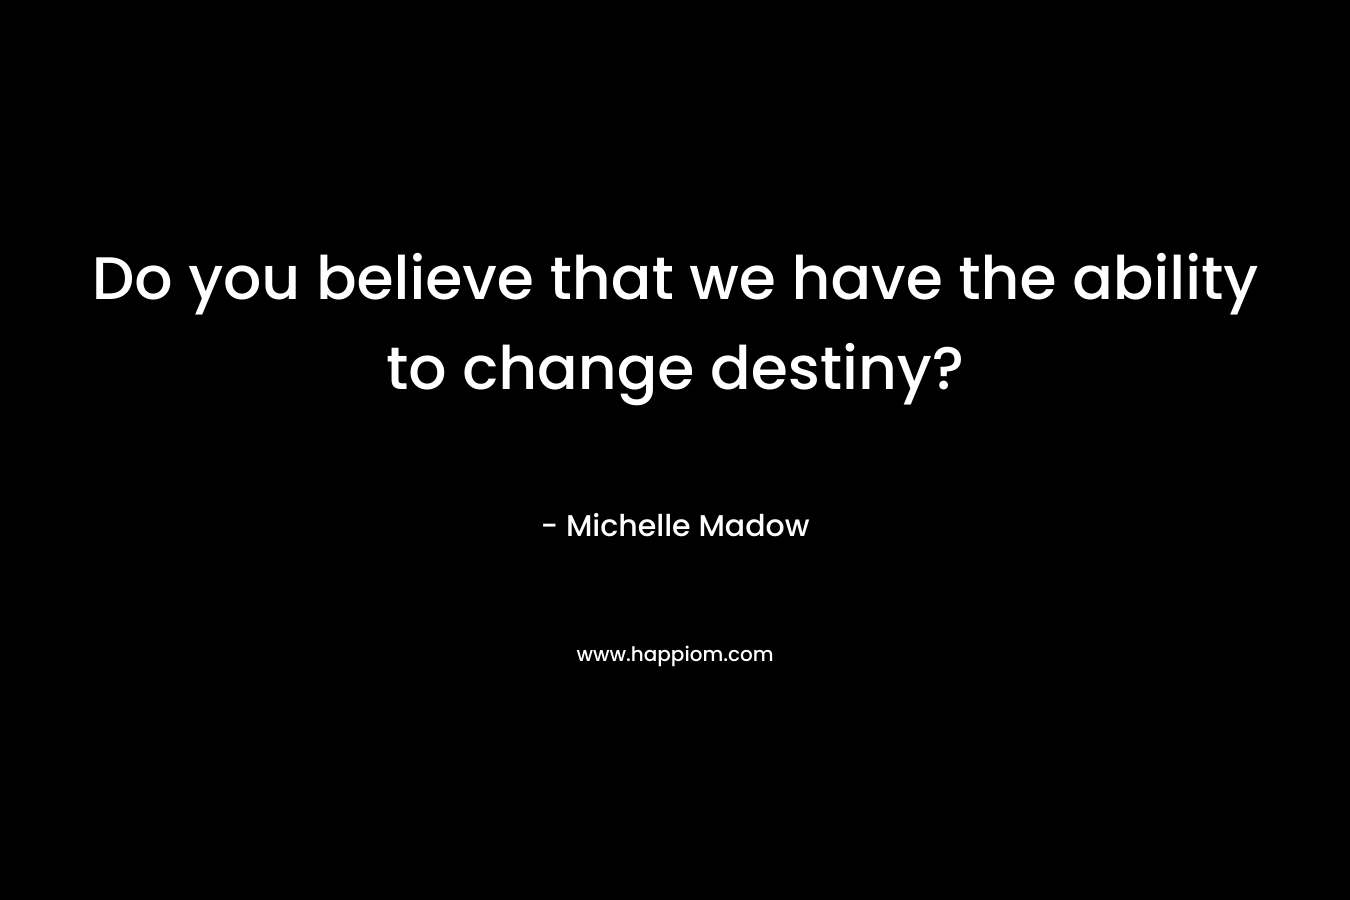 Do you believe that we have the ability to change destiny?